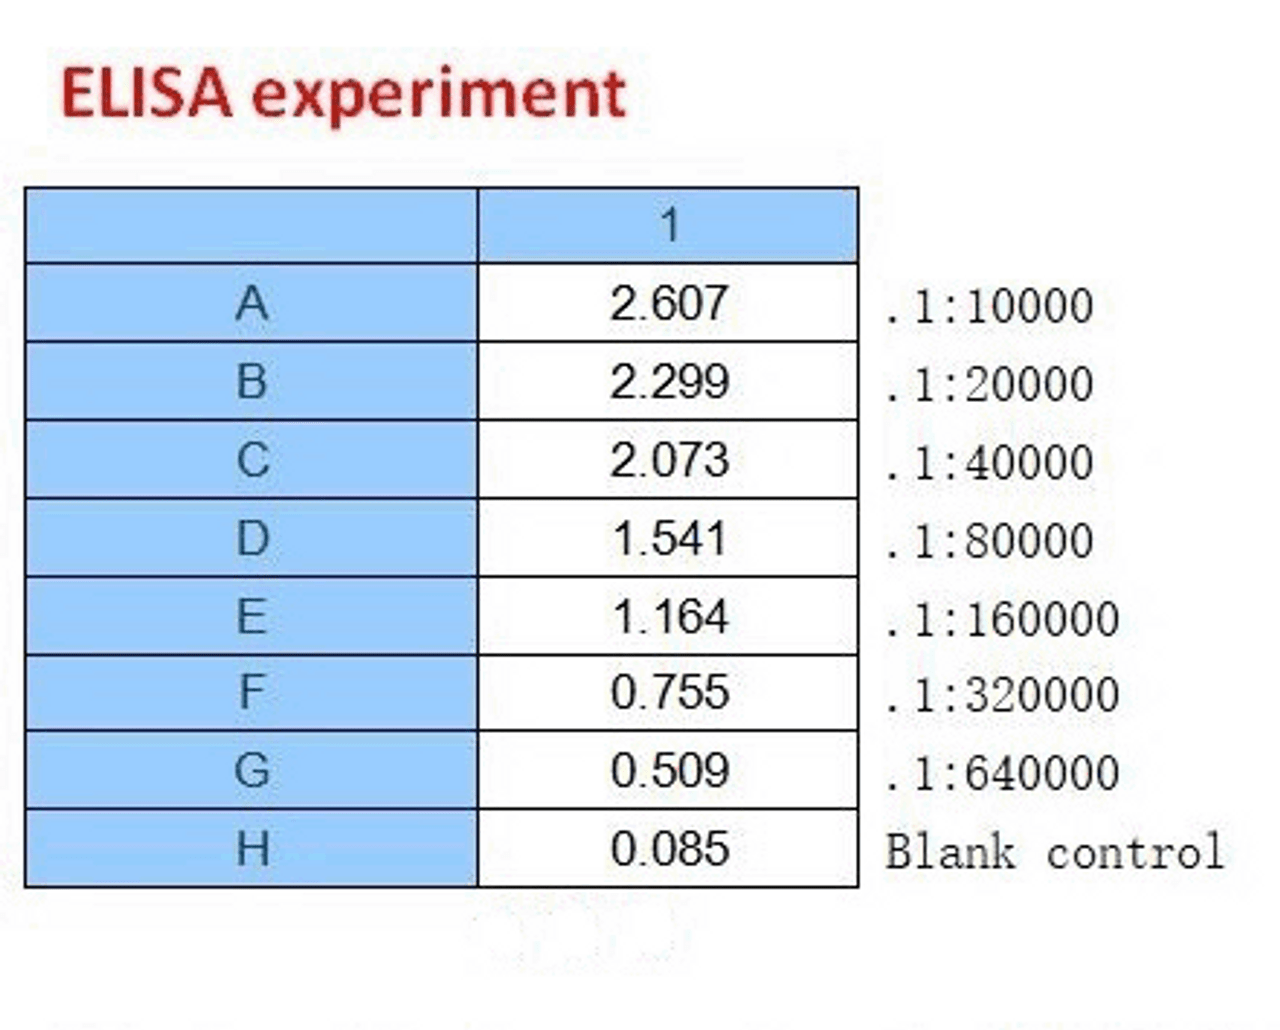 <strong>Figure 2 ELISA Test</strong><br>
Coating original concentration: 2 ug/mL, 100 uL/well sample is SARS-CoV-2 (COVID-19) Nucleocapsid Recombinant Protein, 10-007.<br>Antibodies: SARS-CoV-2 (COVID-19) Nucleocapsid Monoclonal Antibody, 10-548.<br>Secondary: Goat anti-human IgG HRP conjugate at 1:10000 dilution.<br>Develop: 15min, 100 uL/well.<br>Stop: Stop buffer 50 uL/well.